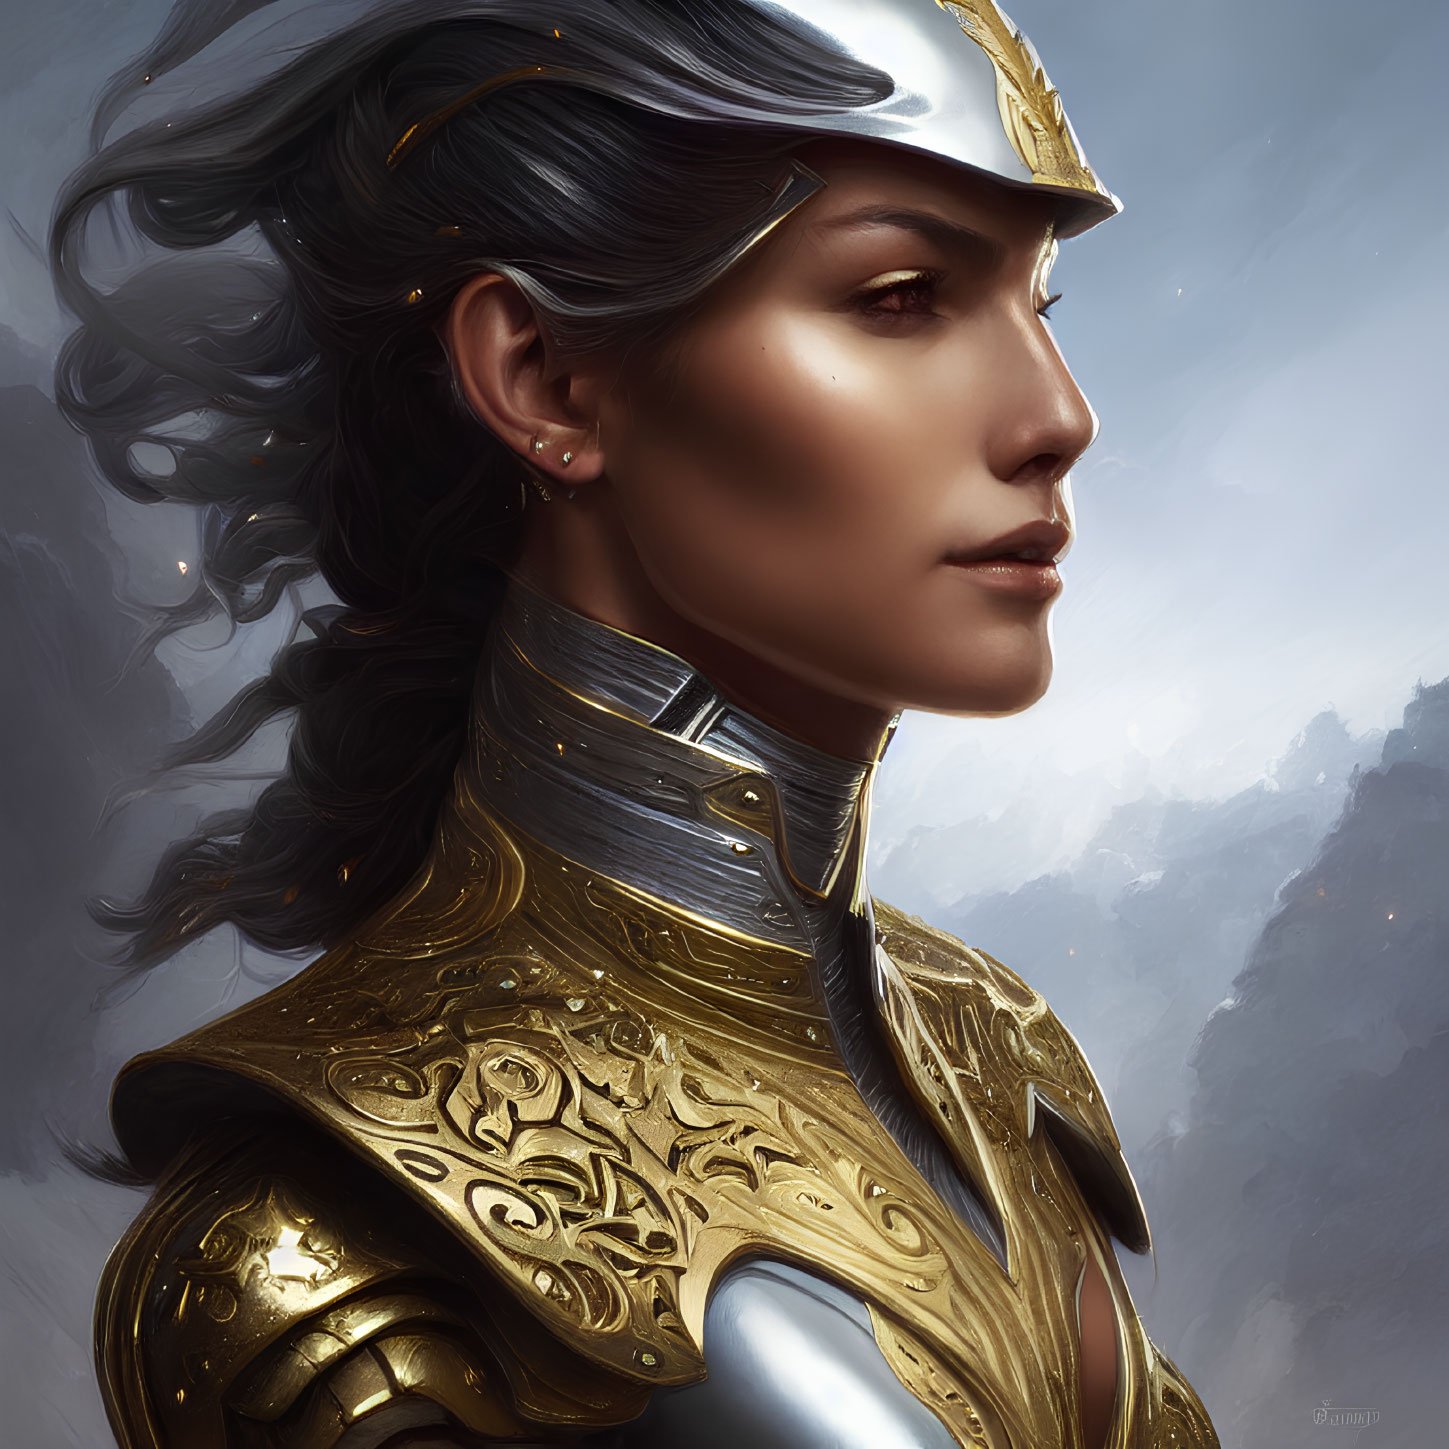 Regal woman in golden armor and helmet against misty mountain backdrop